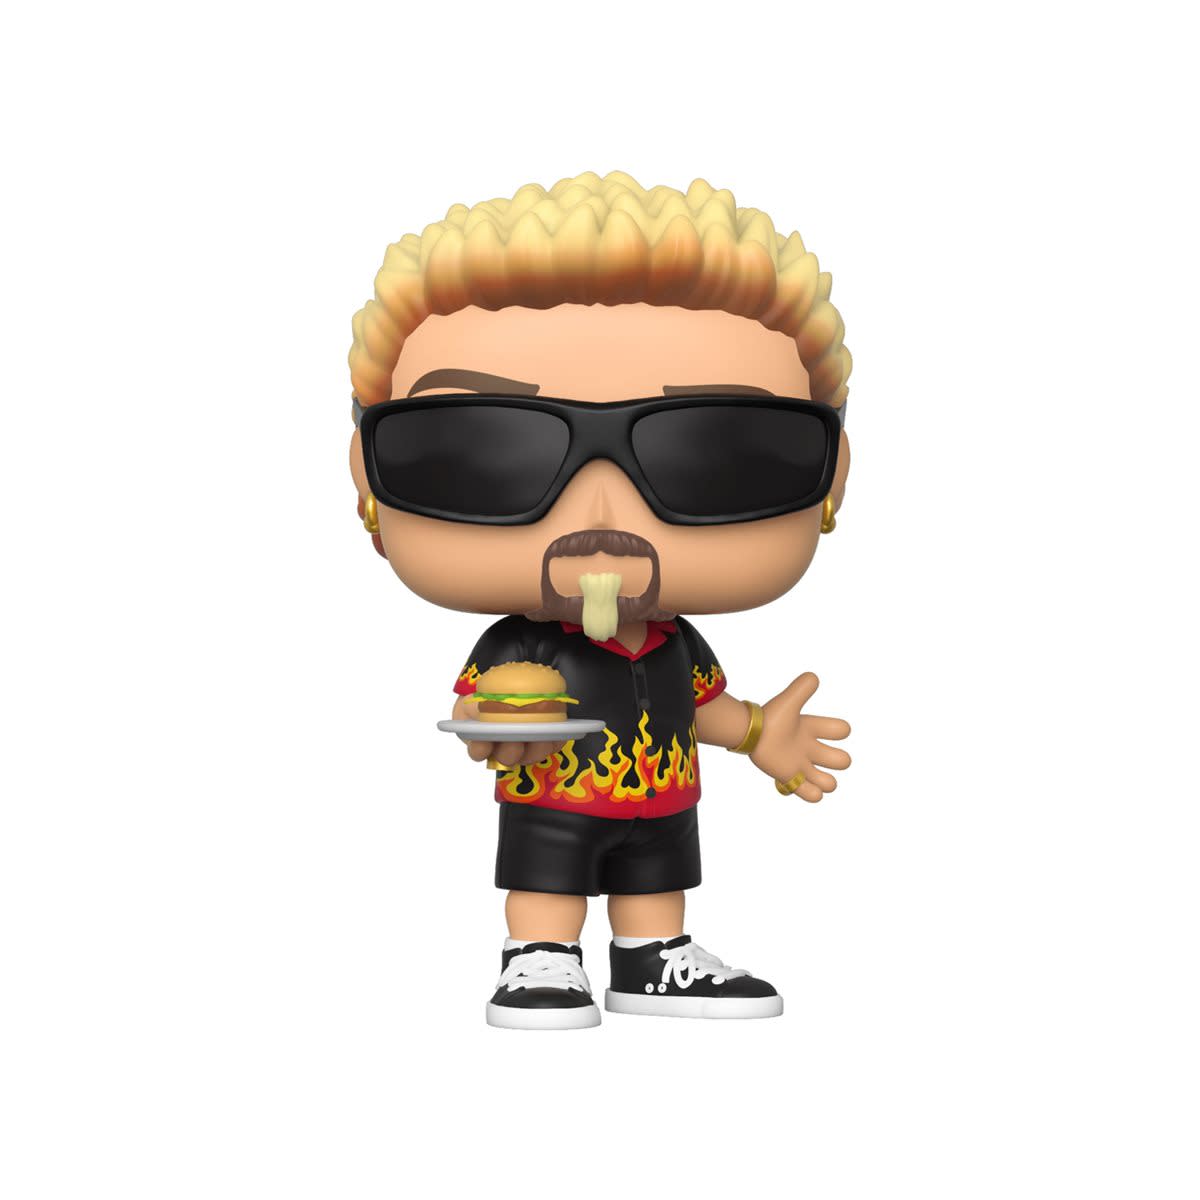 Guy Fieri is the host and star of many foodie shows and now he's got his own vinyl figure.